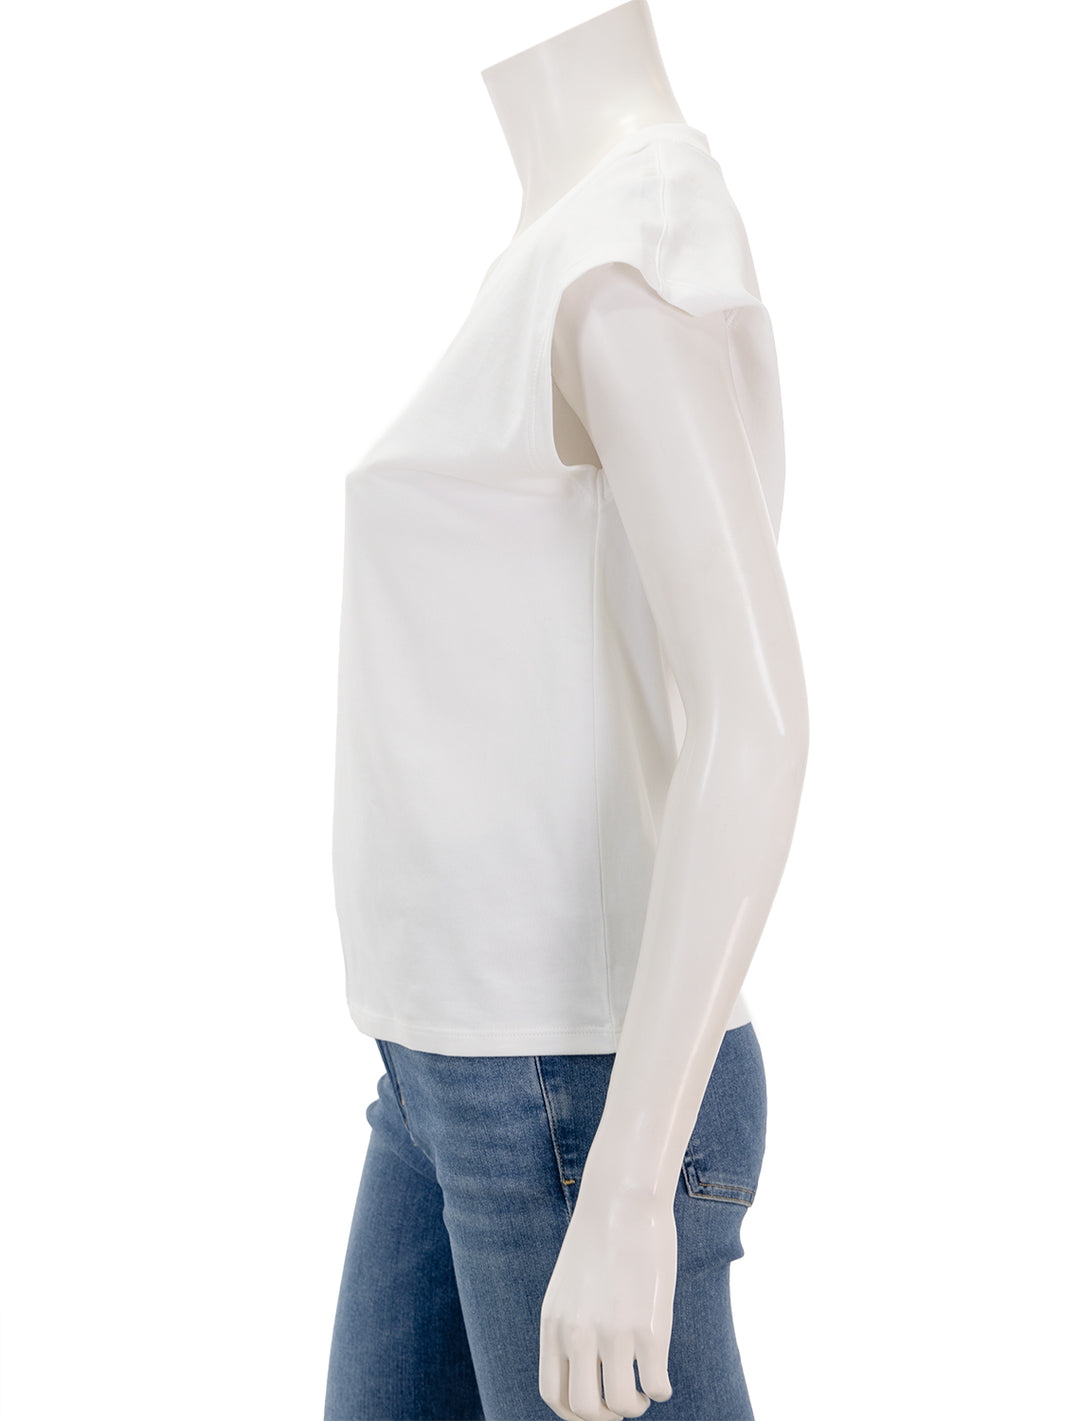 Side view of Patrick Assaraf's iconic vneck dolman tee in white.